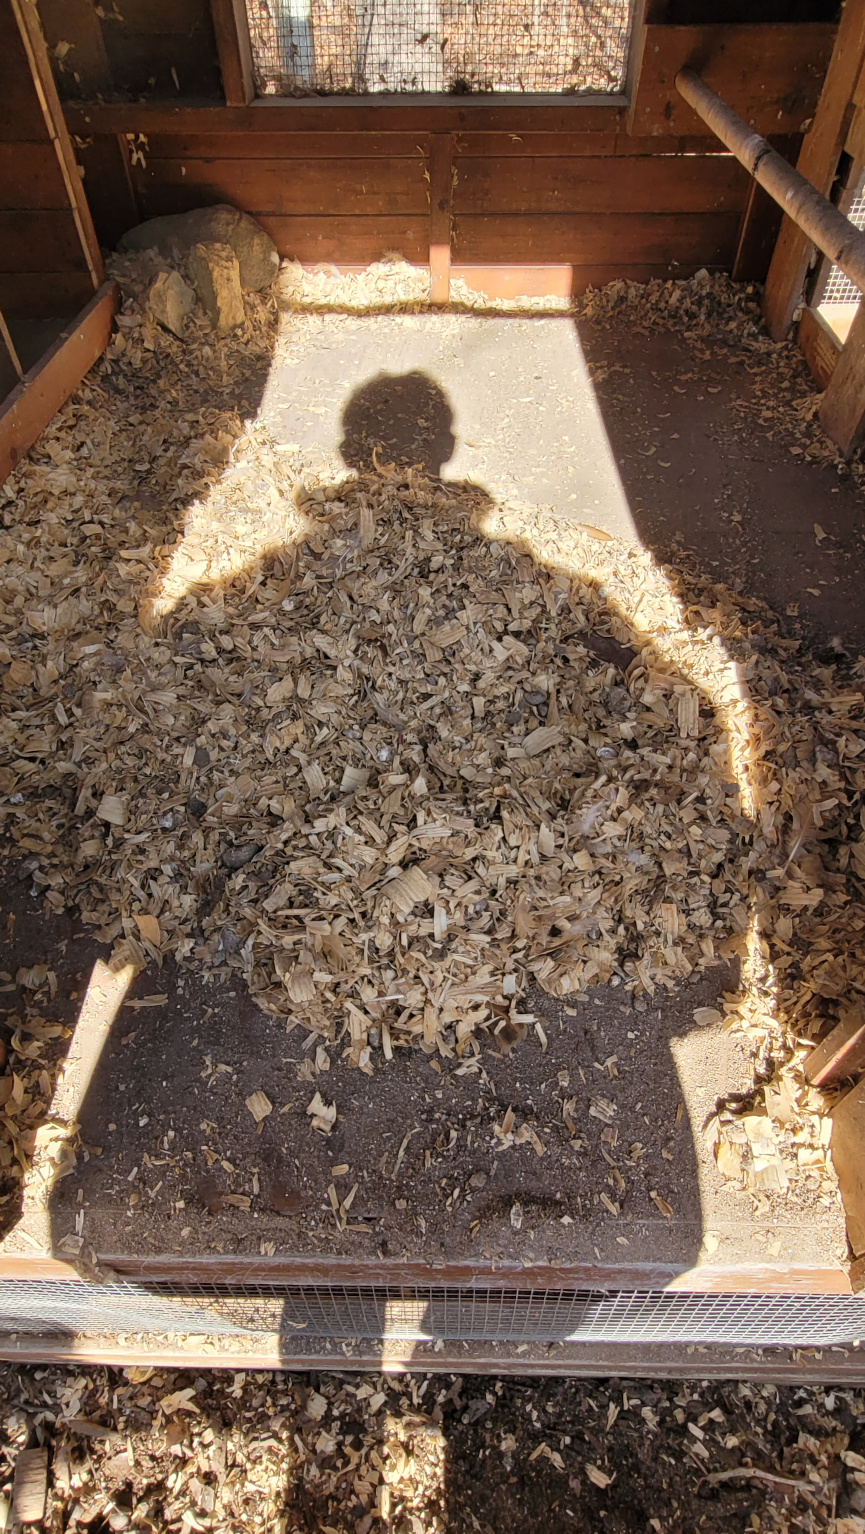 a man's shadow over dirry shavings while cleaning a coop